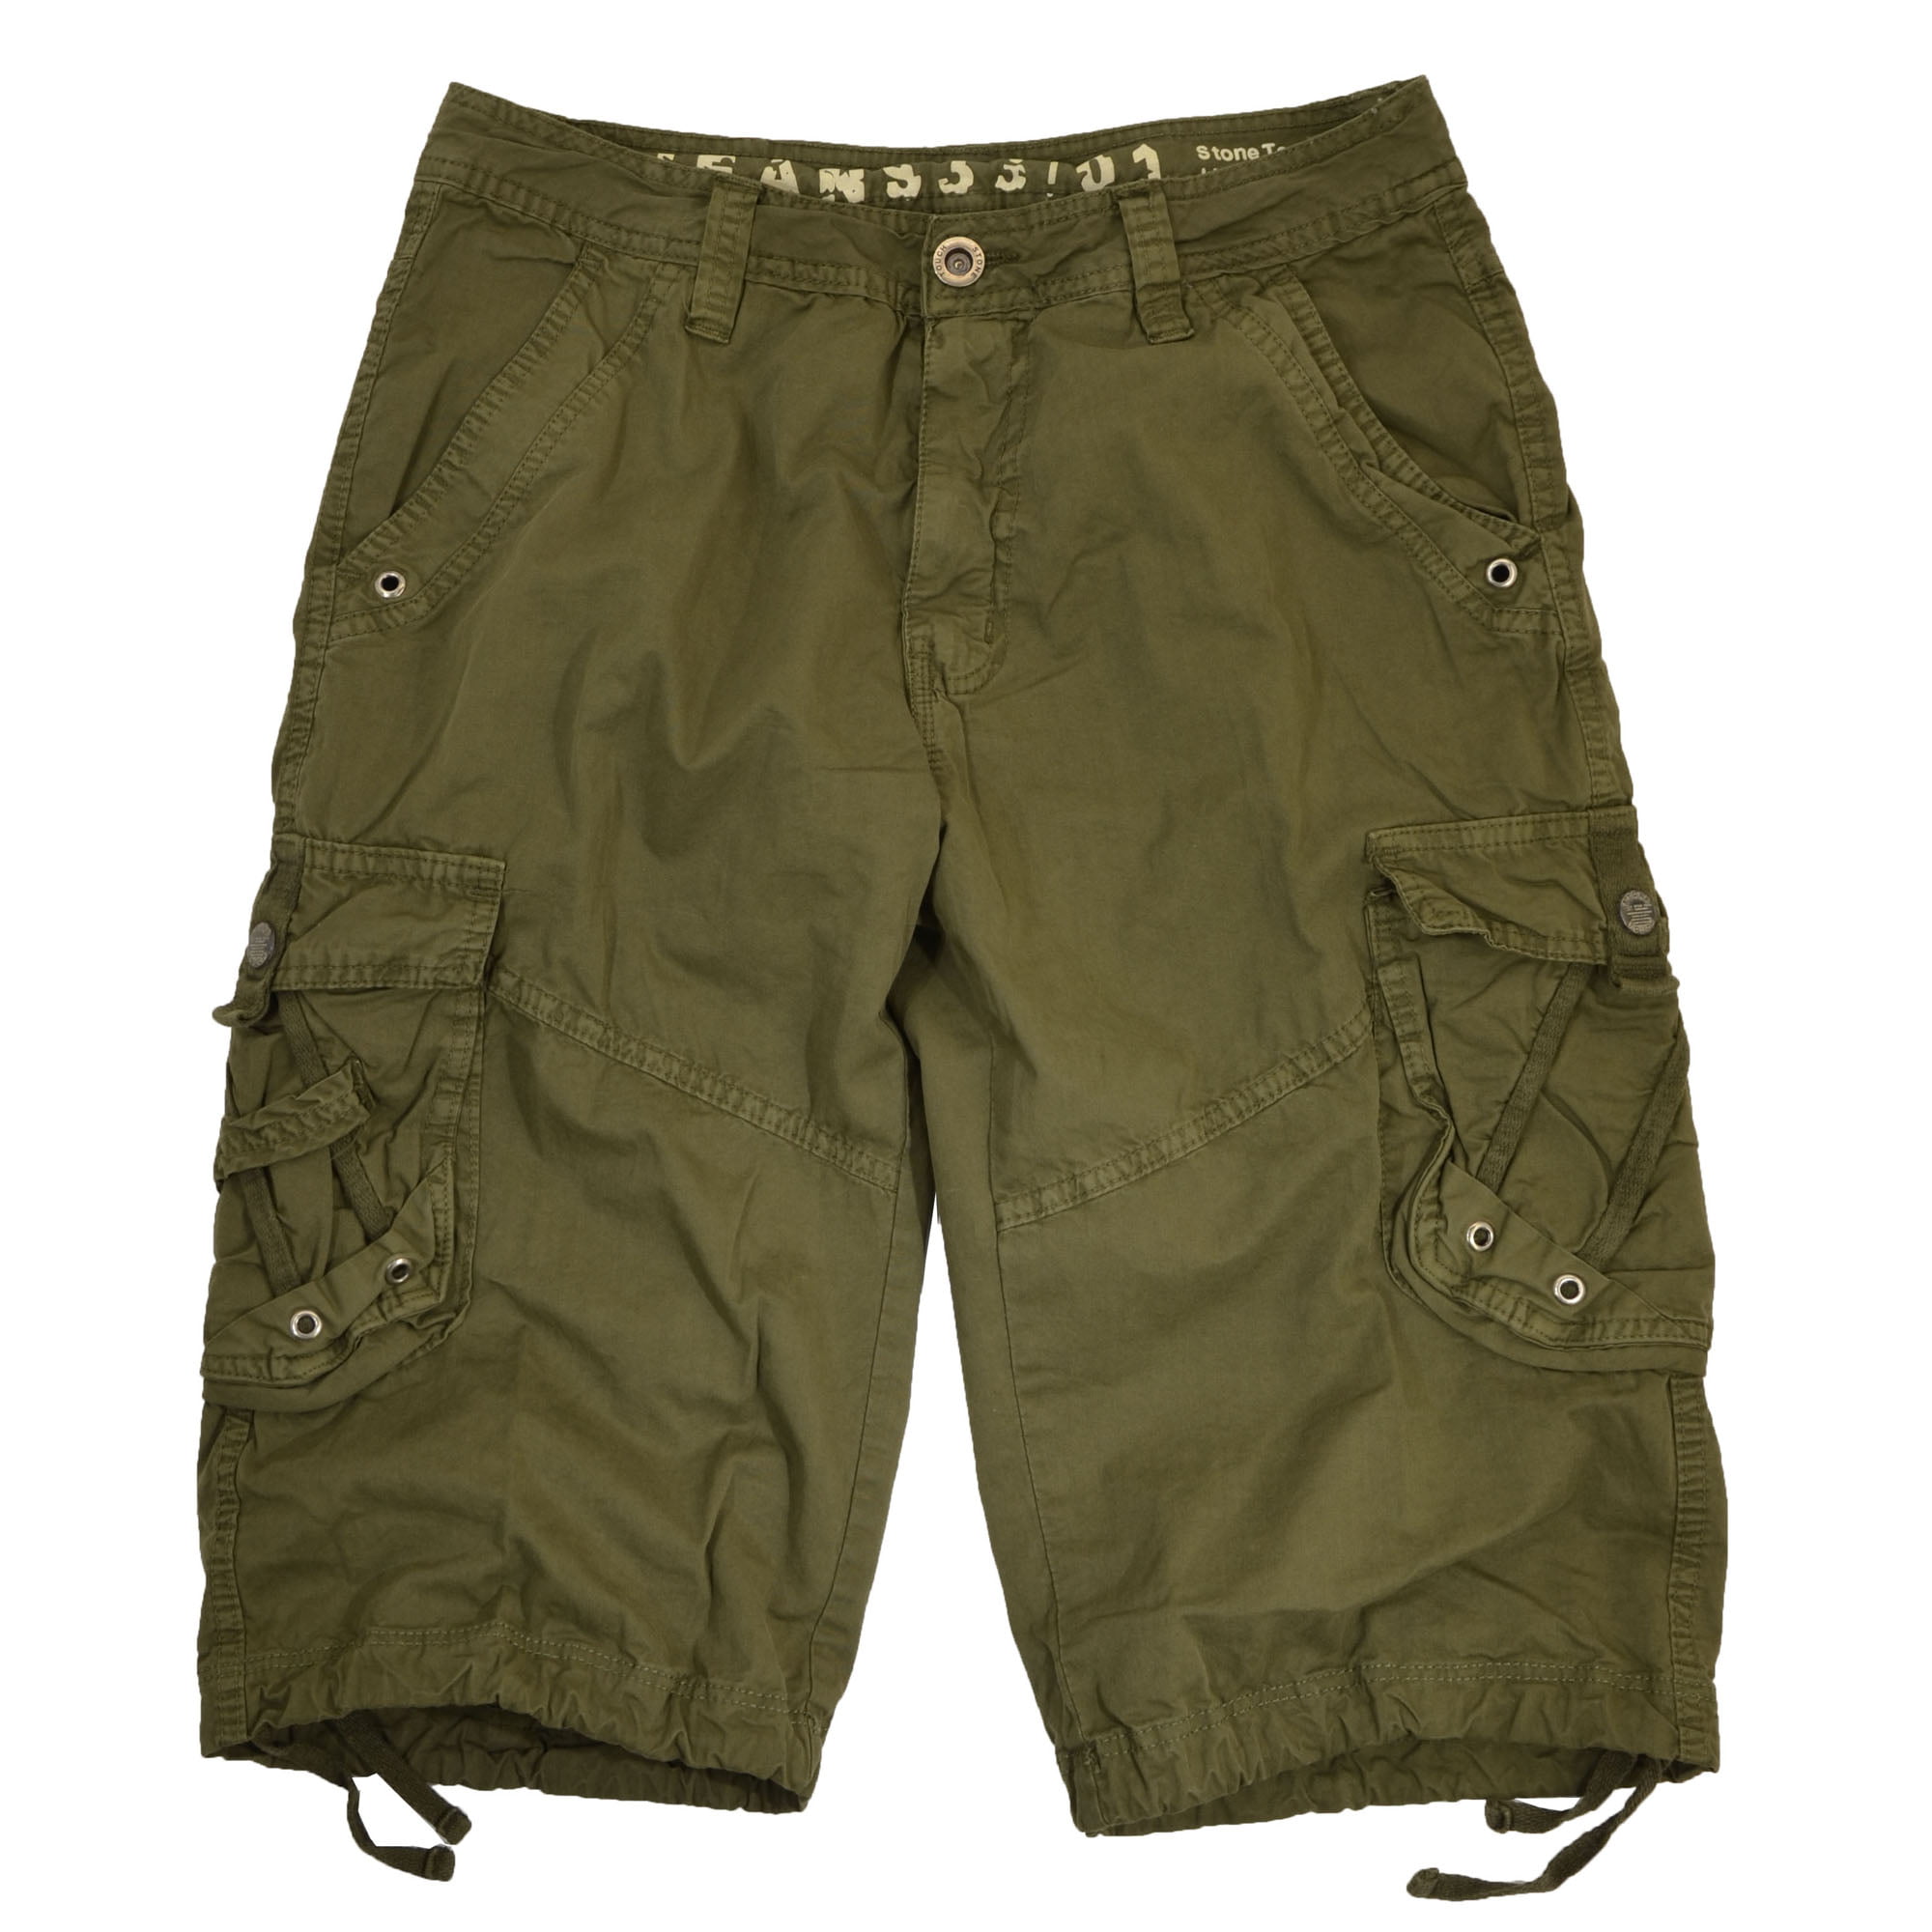 Mens Military Light Olive Cargo Shorts 15 inches inseam #A7S Size 34 ...